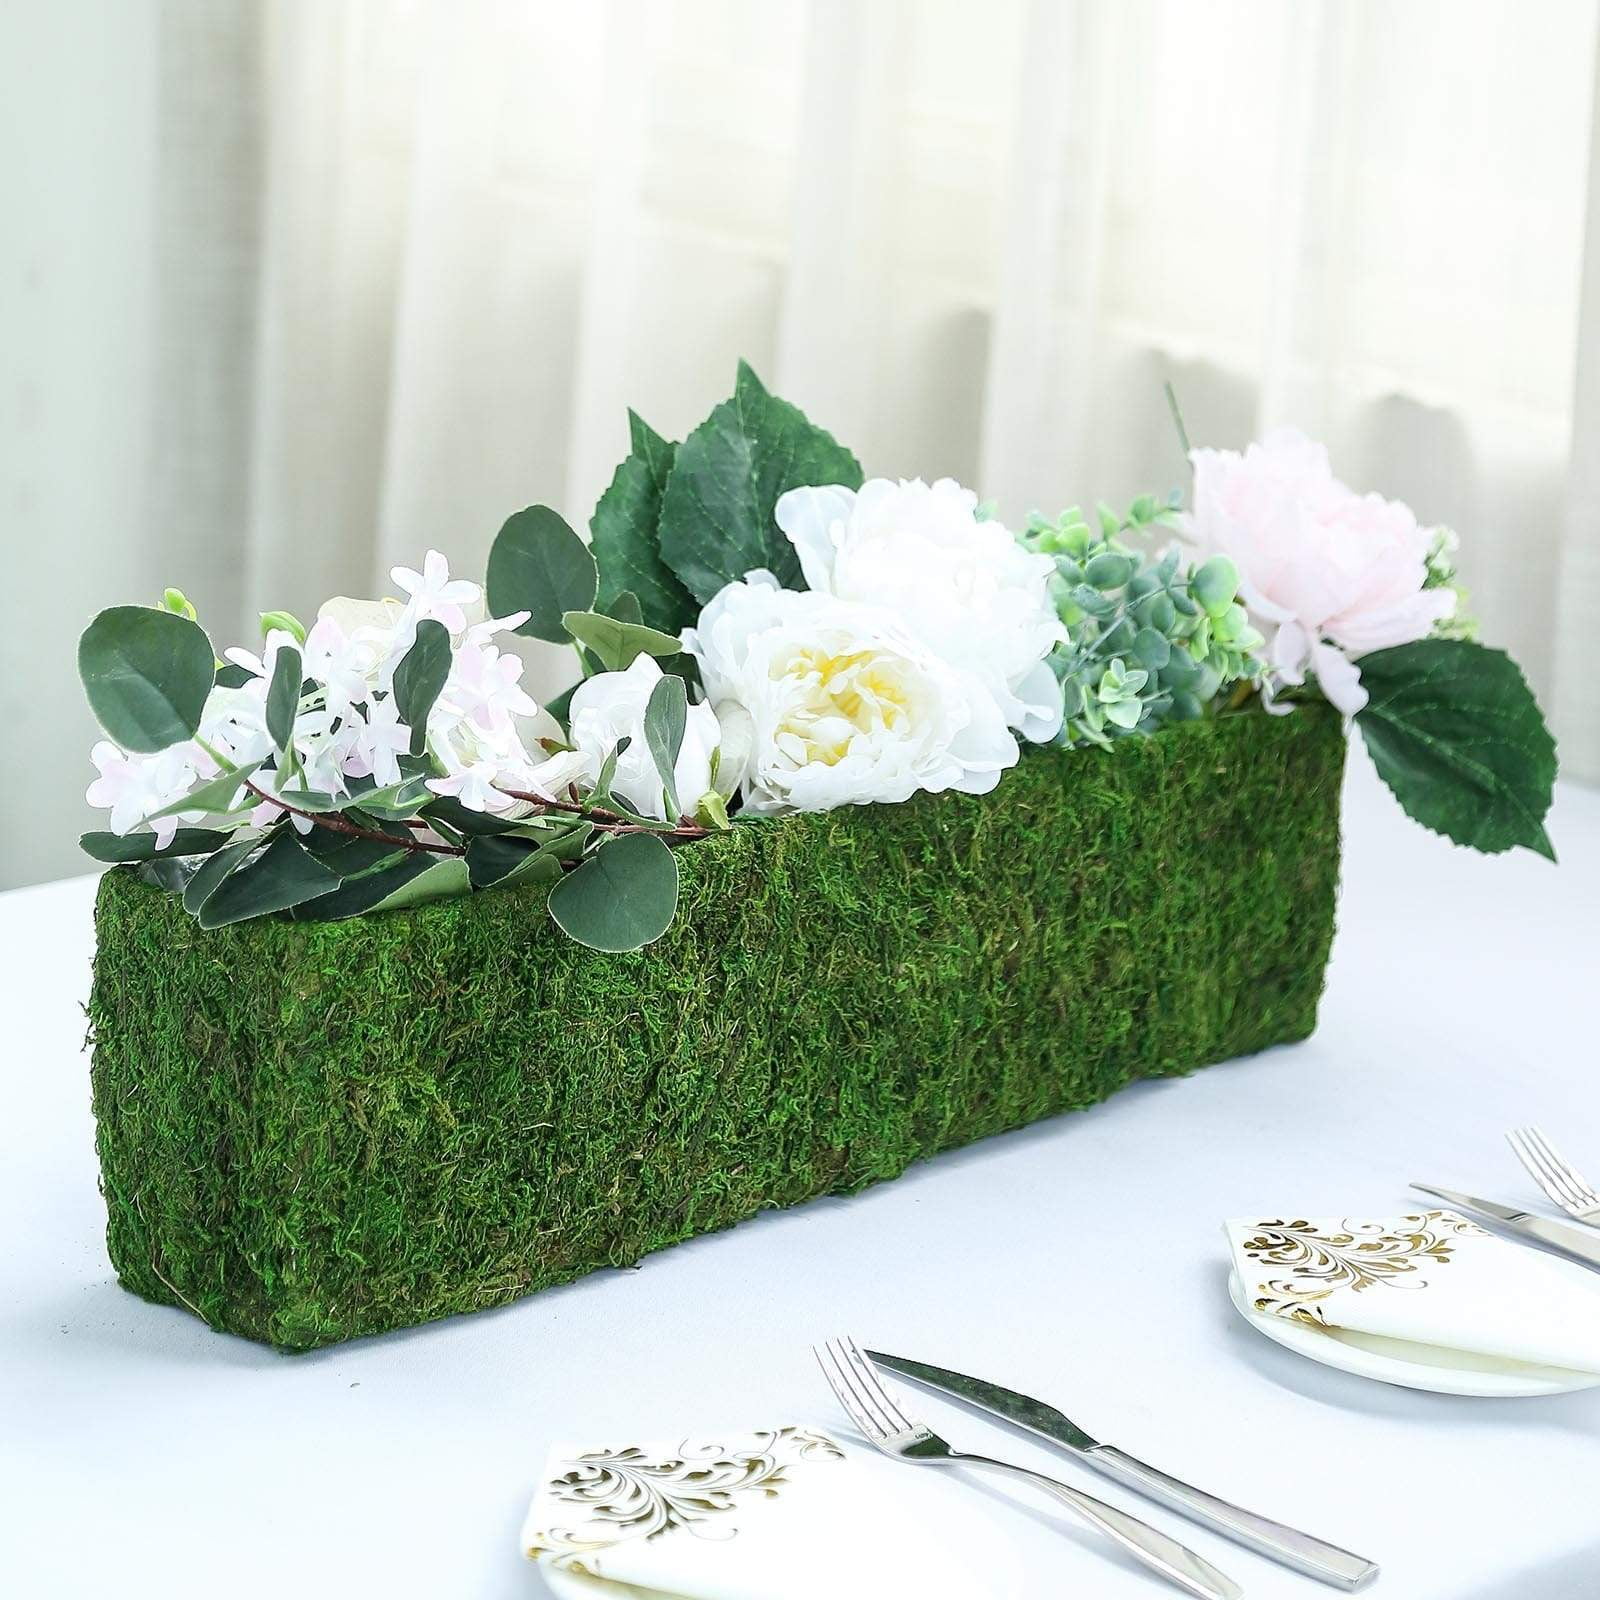 GREEN BROWN 2 Natural Moss Round Planter Boxes Wedding Party Event Supplies Sale 